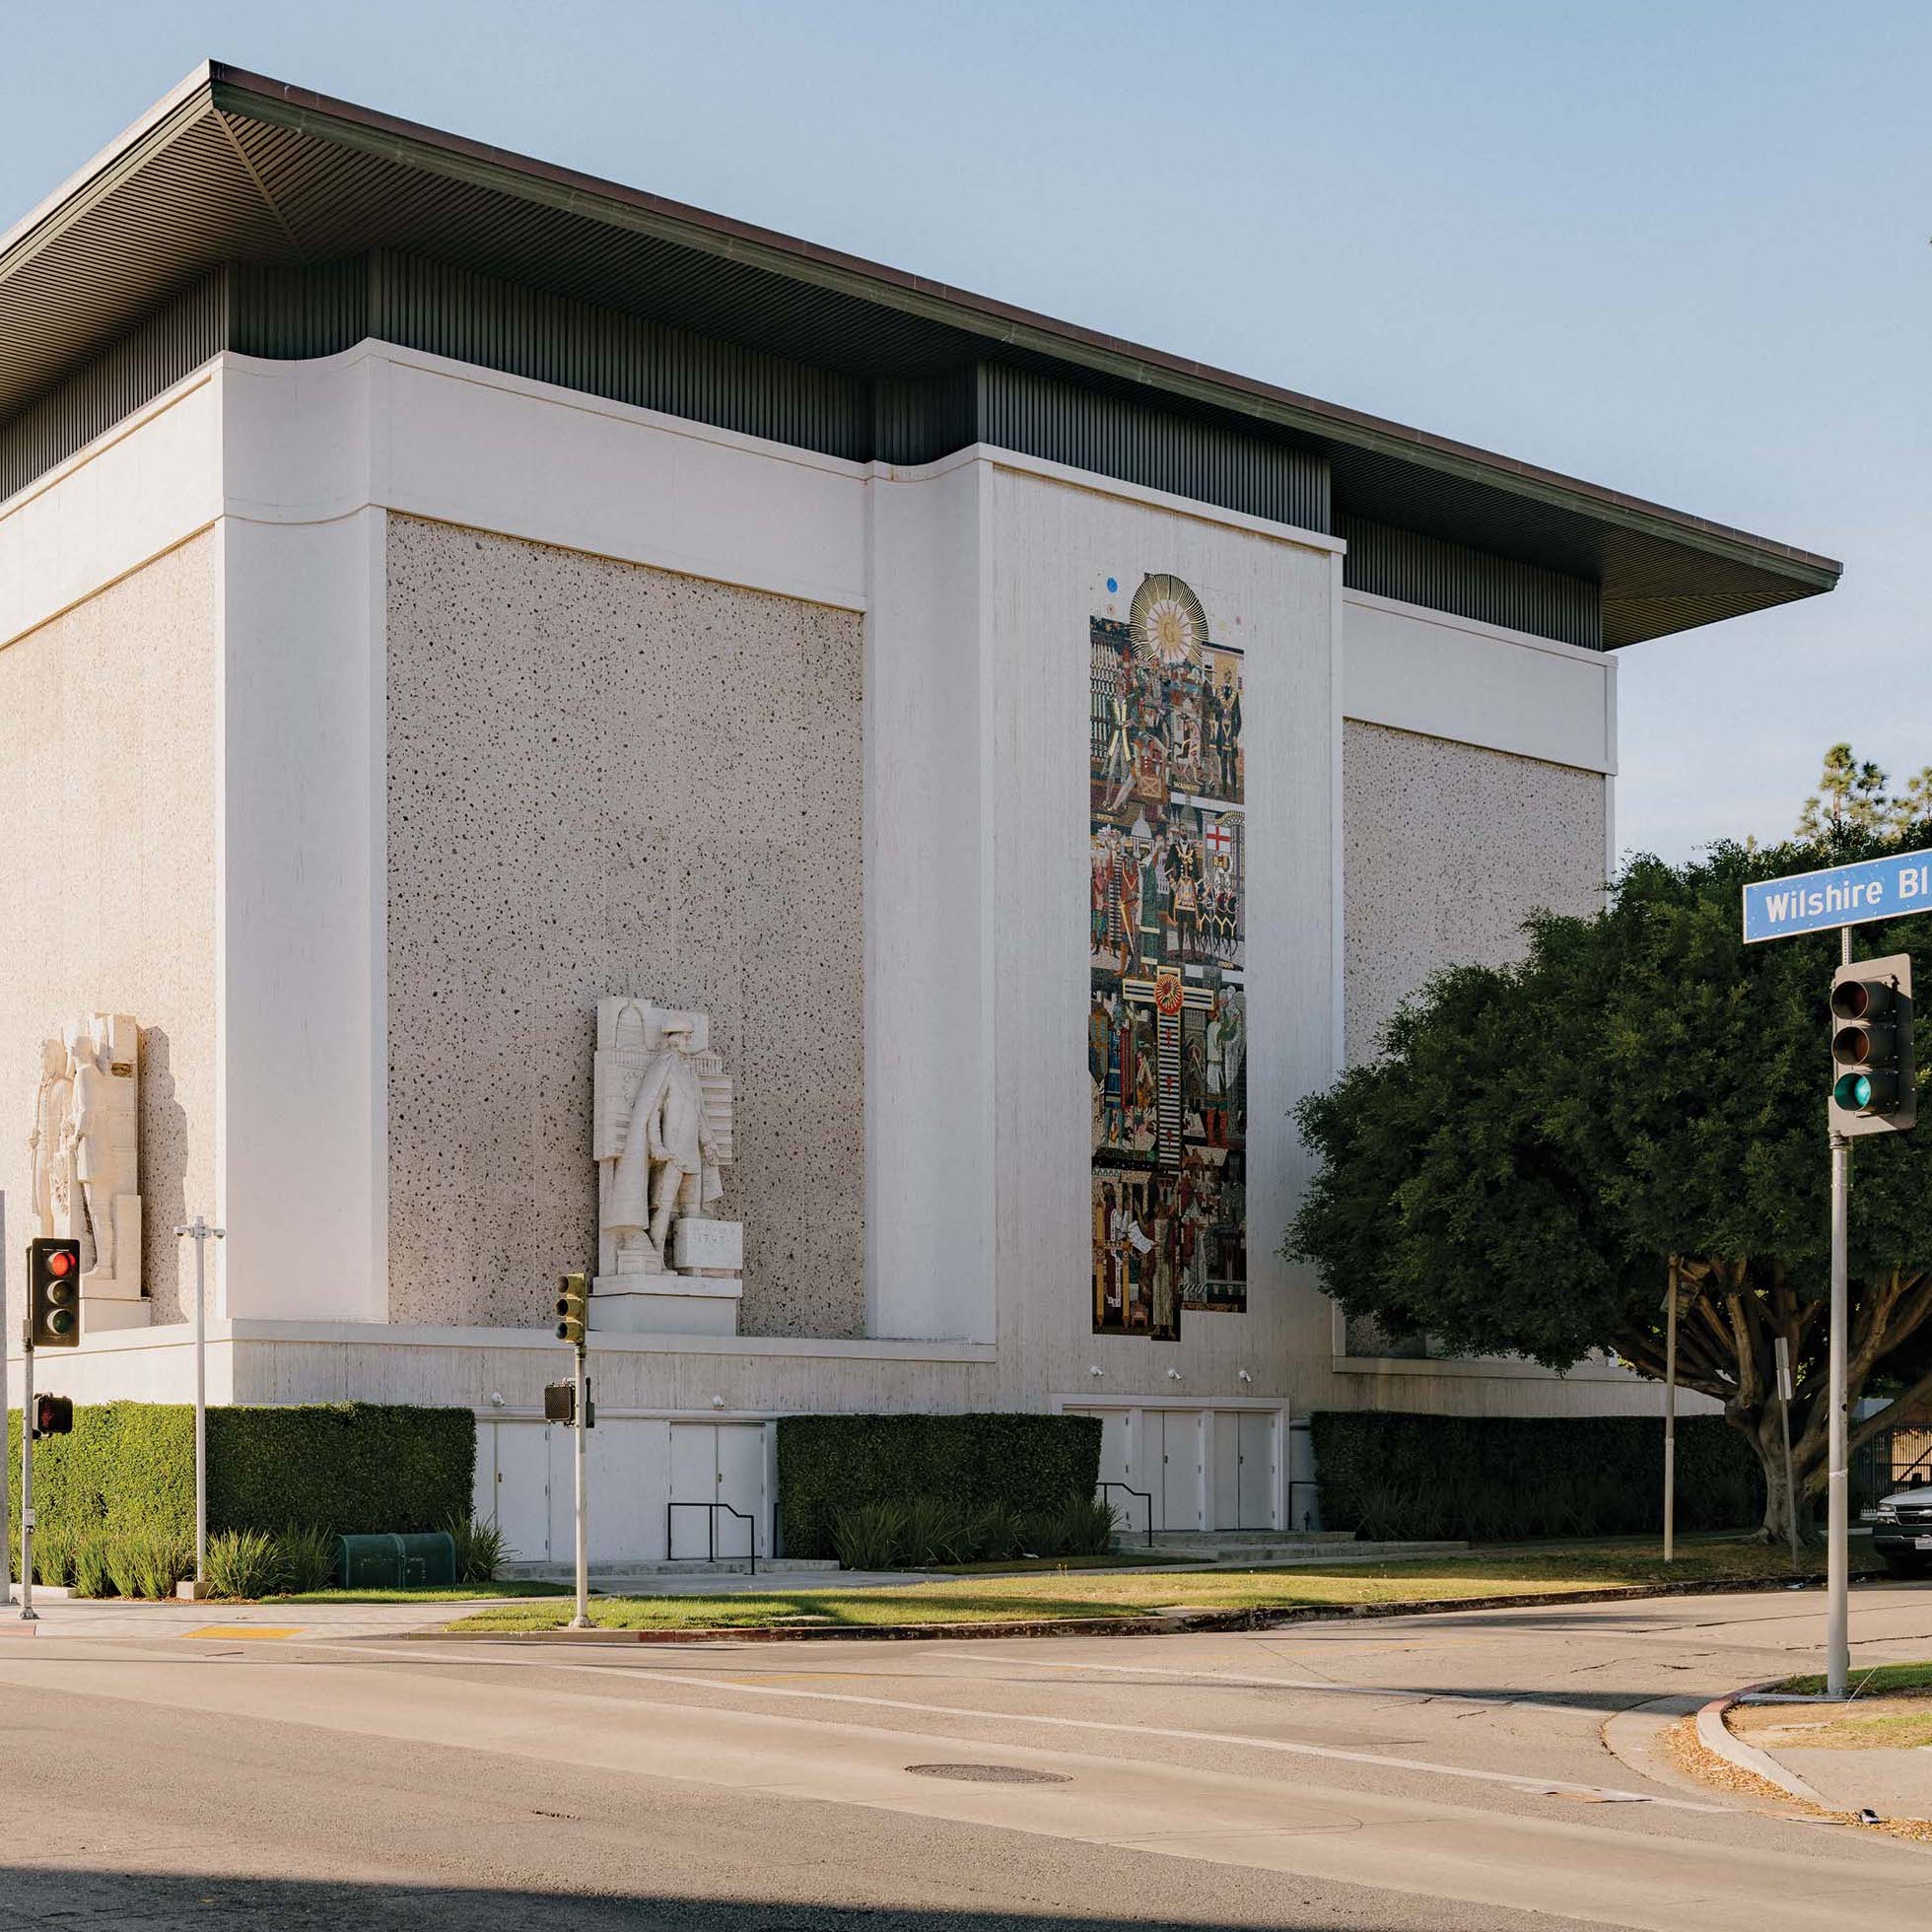 The east side of the Los Angeles Scottish Rite Temple features a seven-story high mosaic by the artist and architectural designer Millard Sheets, featuring temple builders throughout history.